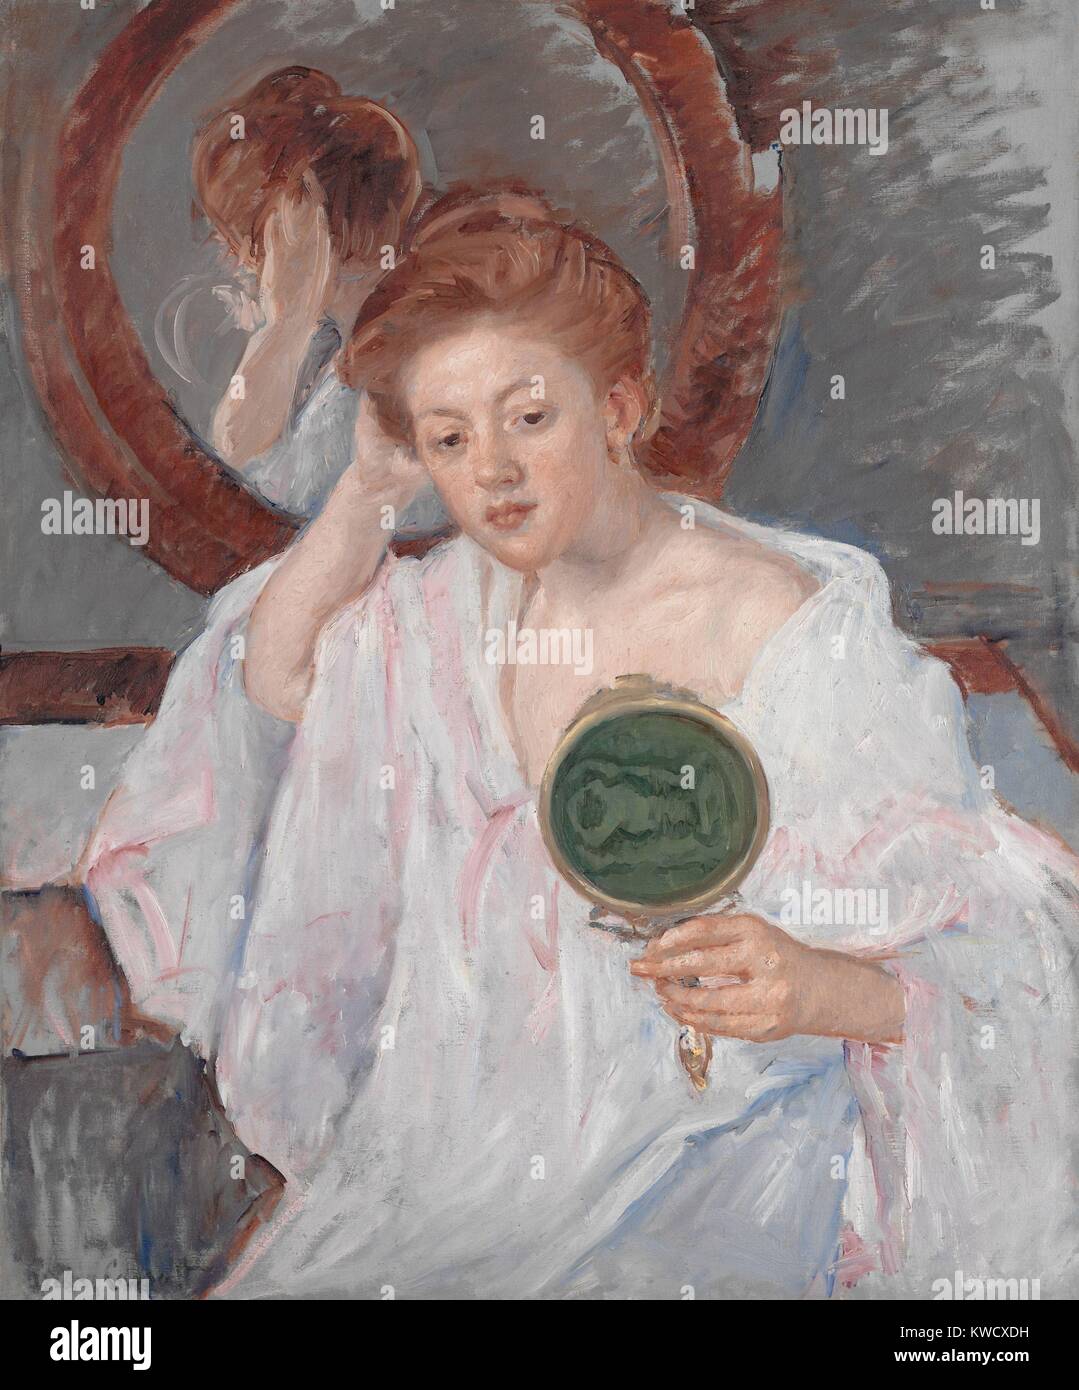 Denise at Her Dressing Table, by Mary Cassatt, 1908-9, French impressionist painting, oil on canvas. An auburn-haired young woman examines her hairdo with two mirrors in a painterly composition of warm browns, pinks and rich grays (BSLOC 2017 3 146) Stock Photo